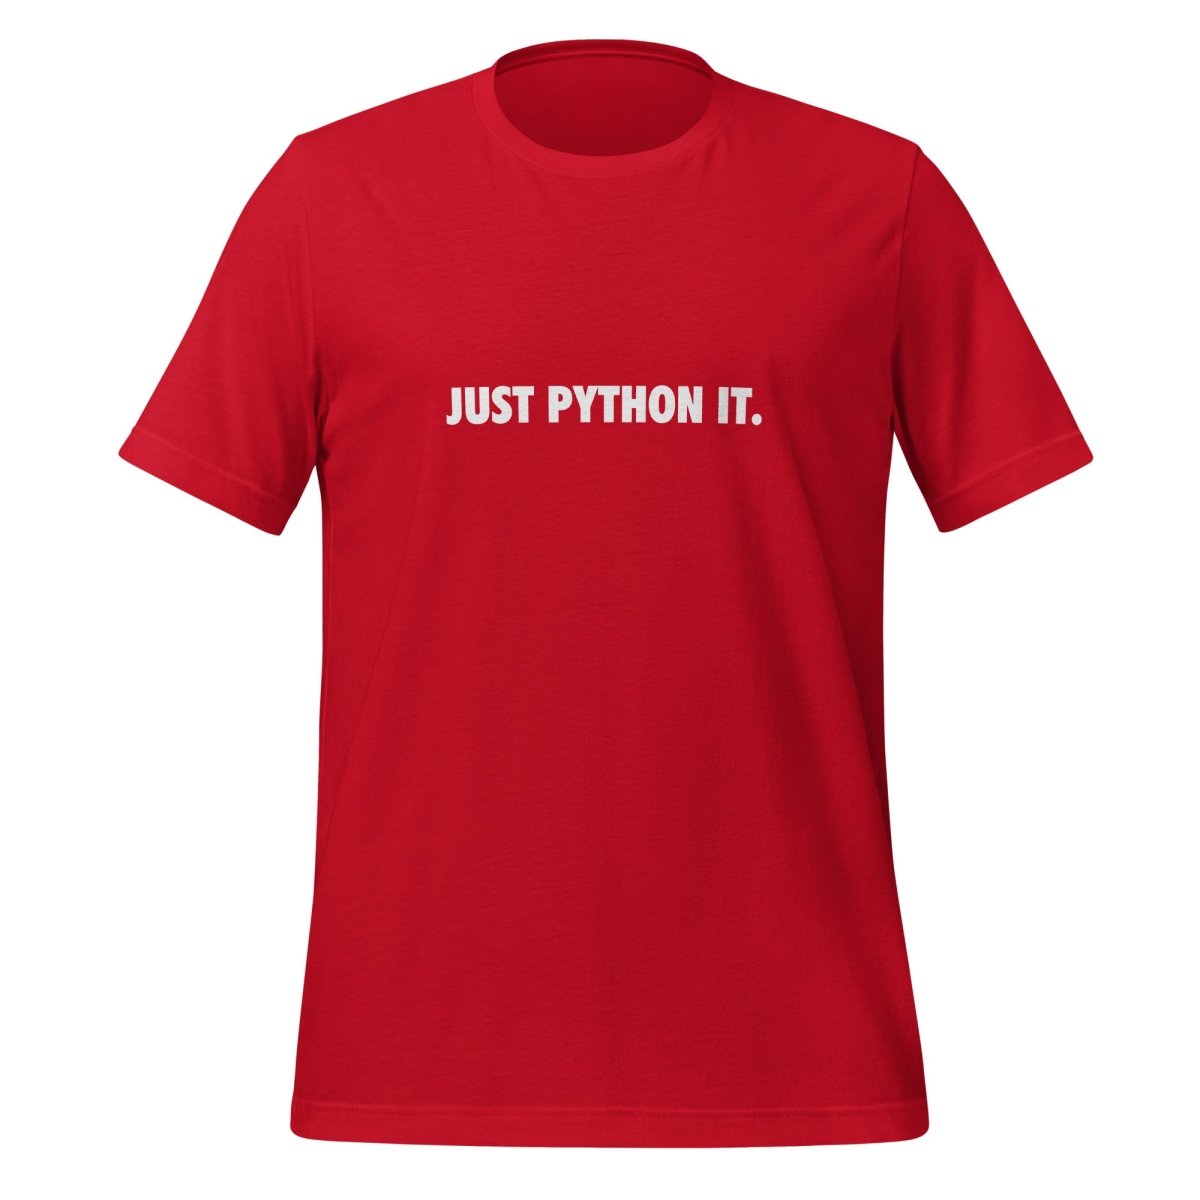 JUST PYTHON IT. T - Shirt (unisex) - Red - AI Store